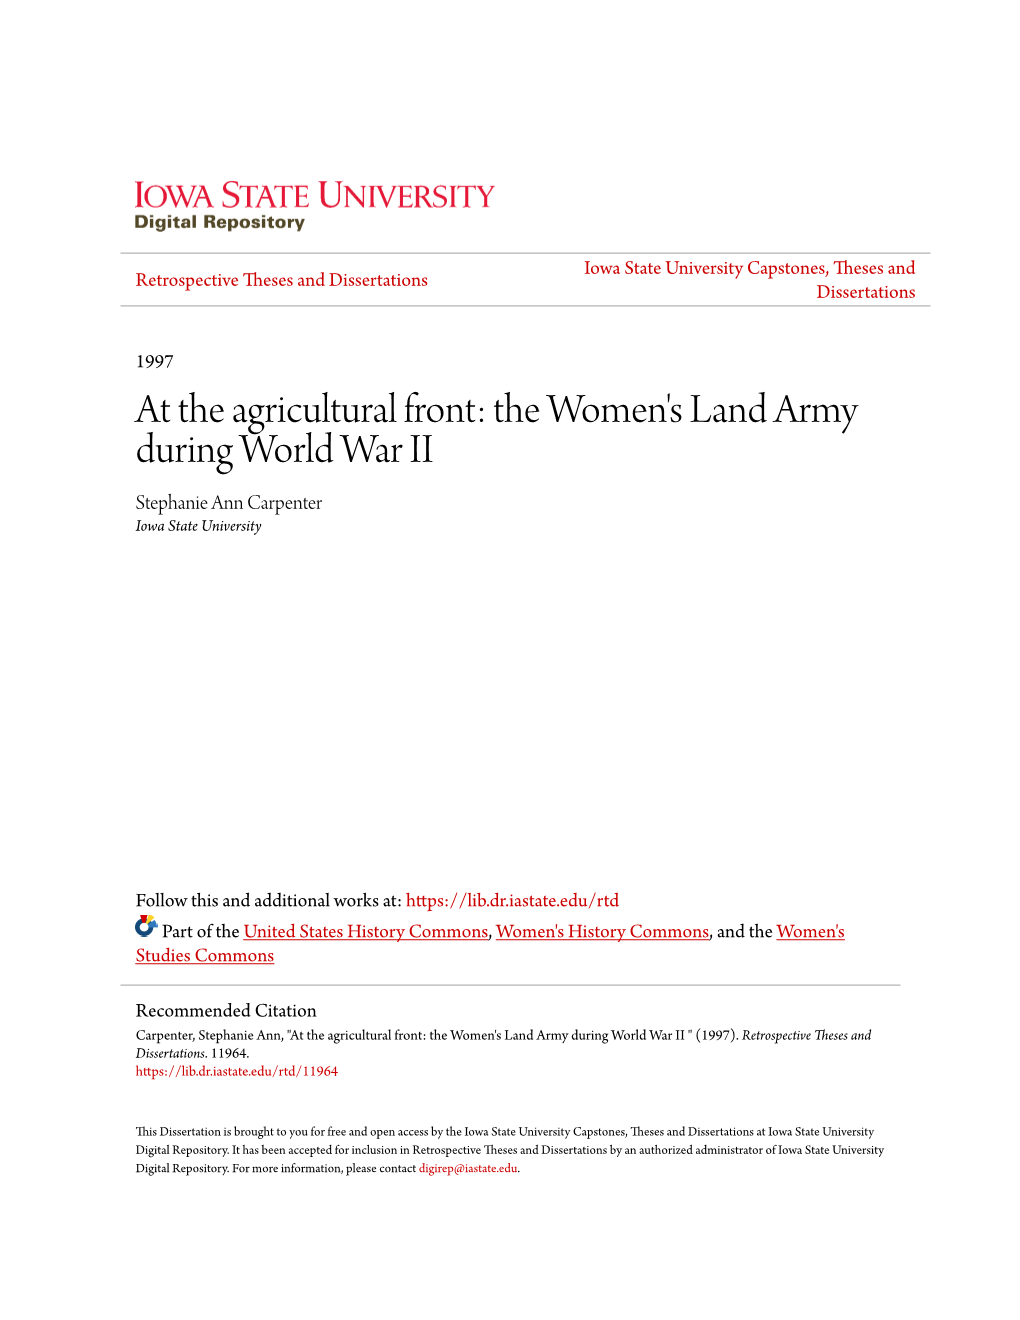 At the Agricultural Front: the Women's Land Army During World War II Stephanie Ann Carpenter Iowa State University